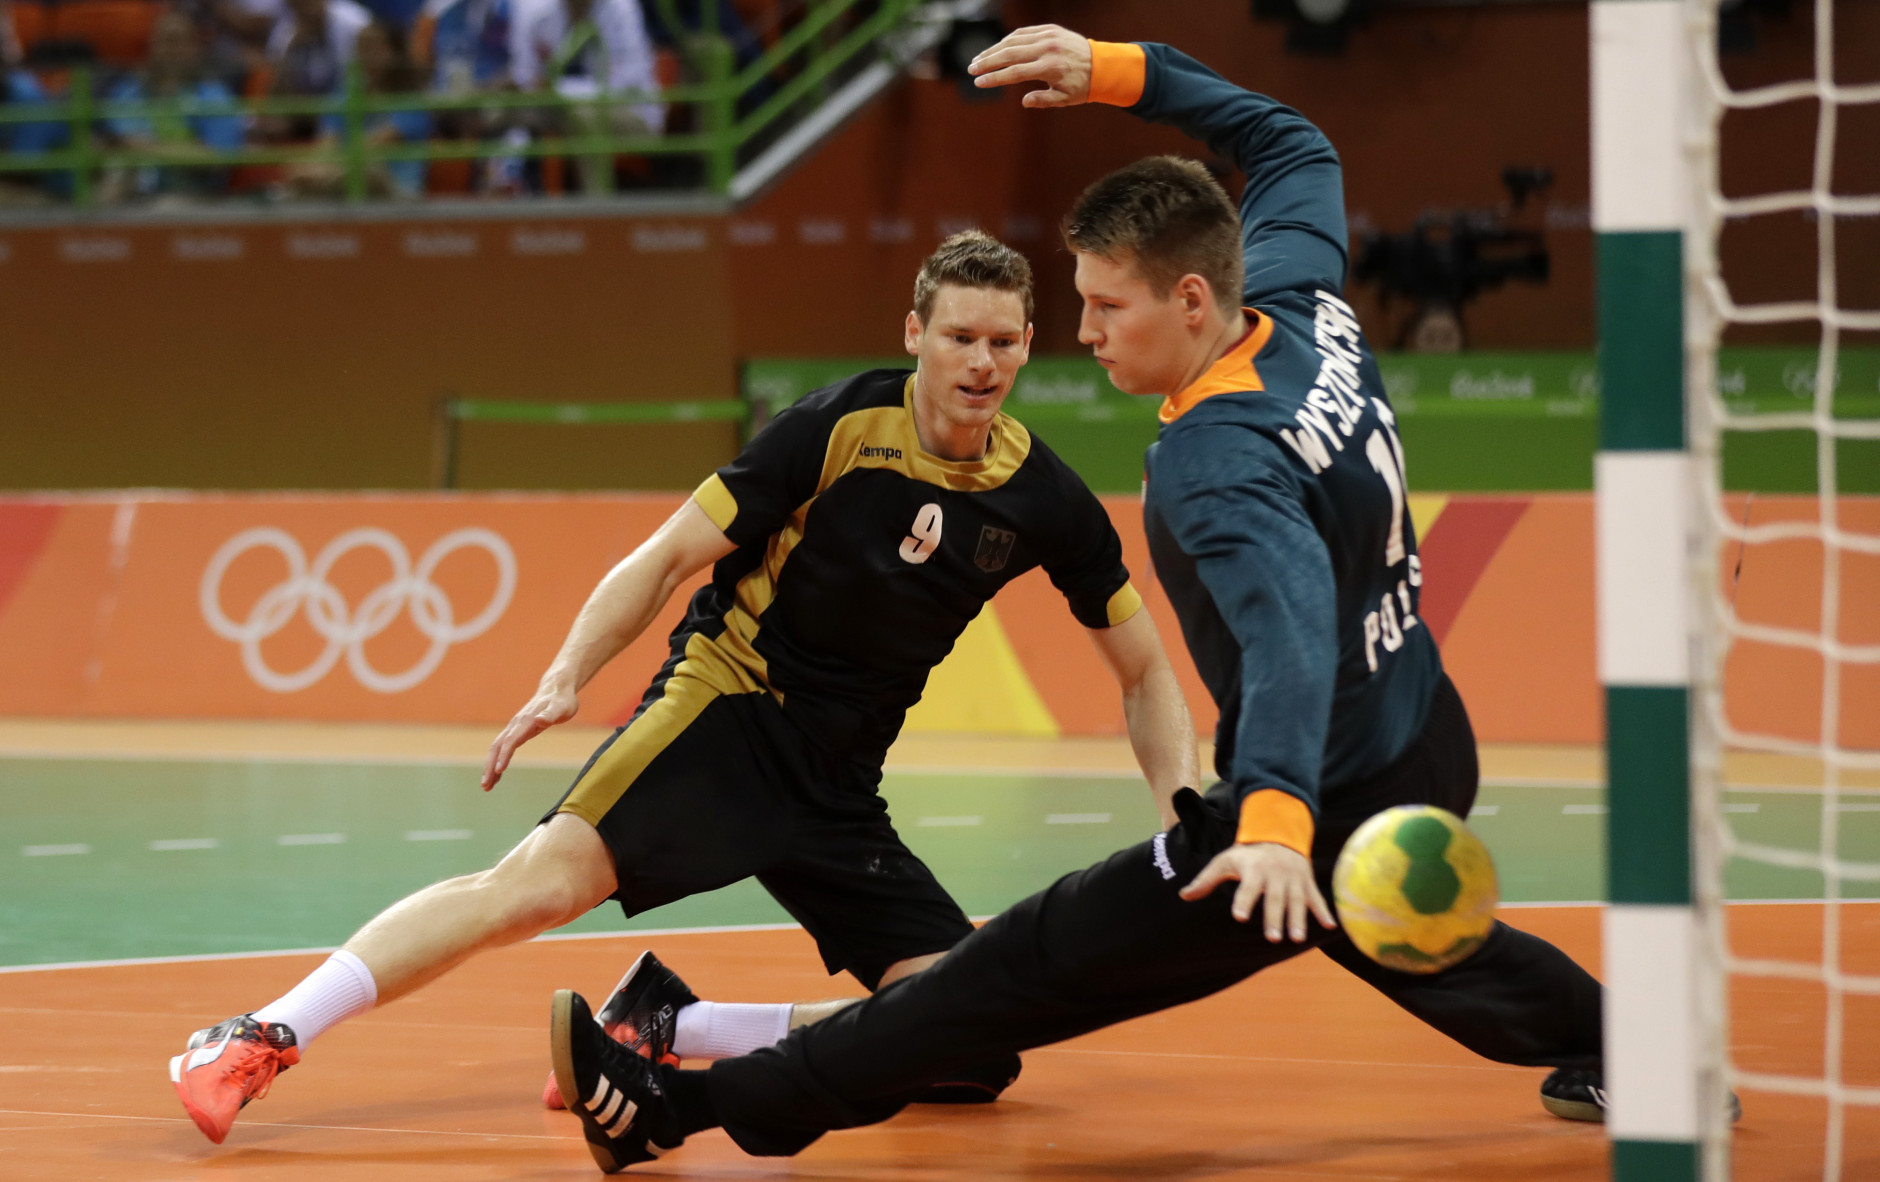 Germany's Tobias Reichmann scores a goal past Poland's Piotr Wyszomirski, right, during the men's bronze medal handball match between Germany and Poland at the 2016 Summer Olympics in Rio de Janeiro, Brazil, Sunday, Aug. 21, 2016. (AP Photo/Ben Curtis)